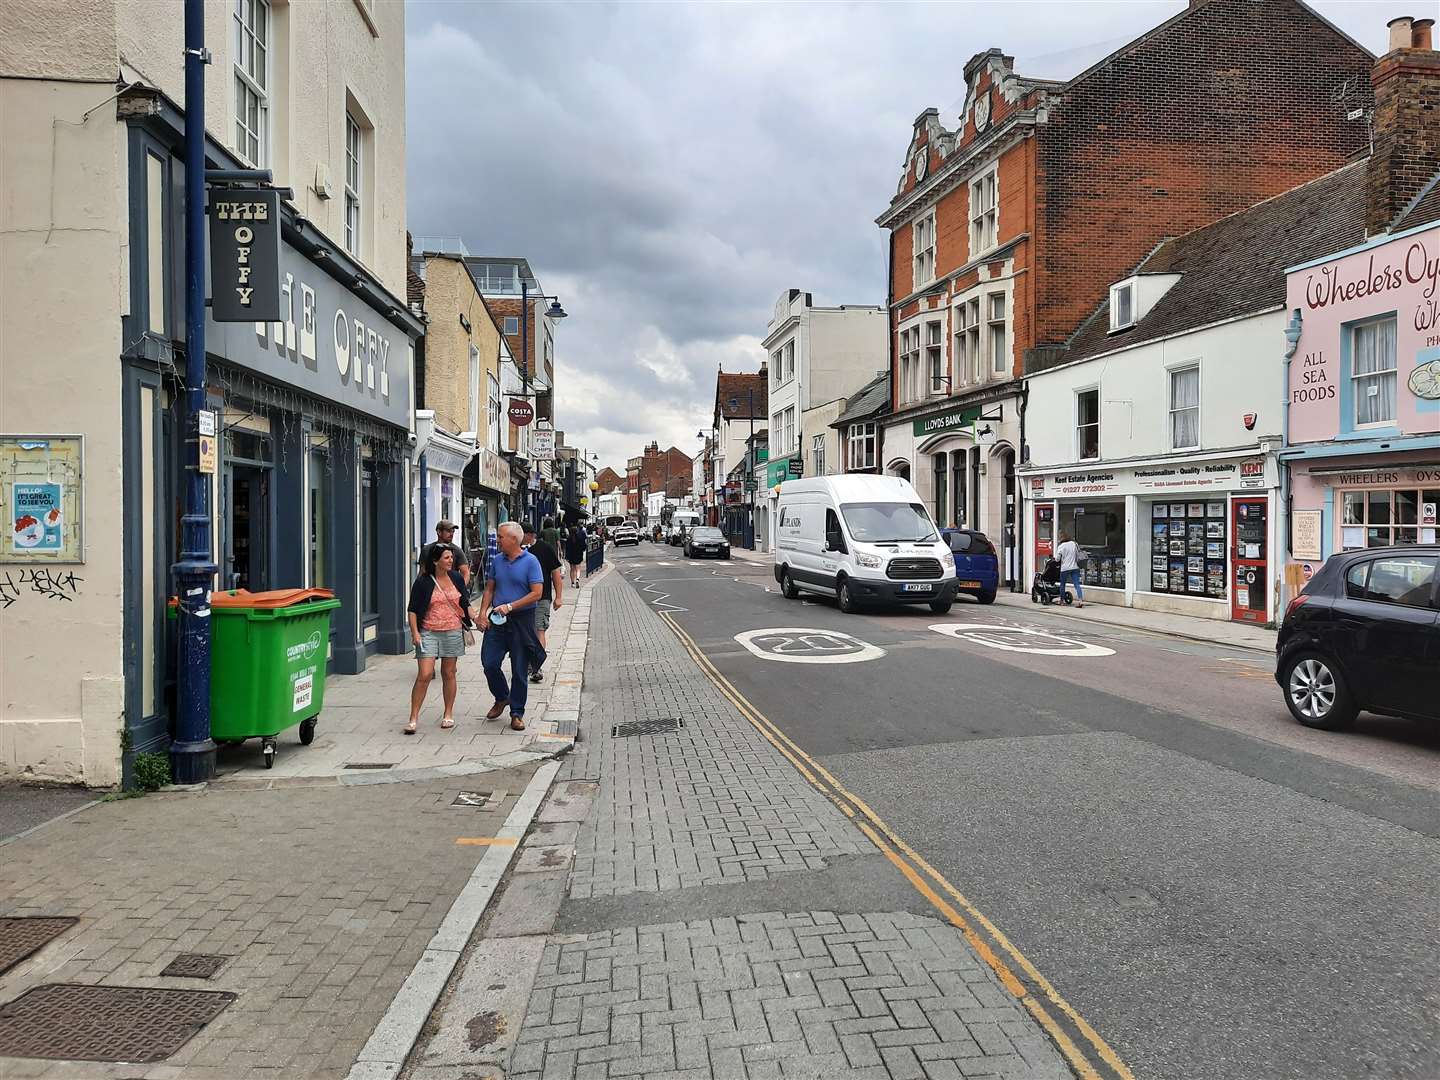 The incident happened in Whitstable High Street